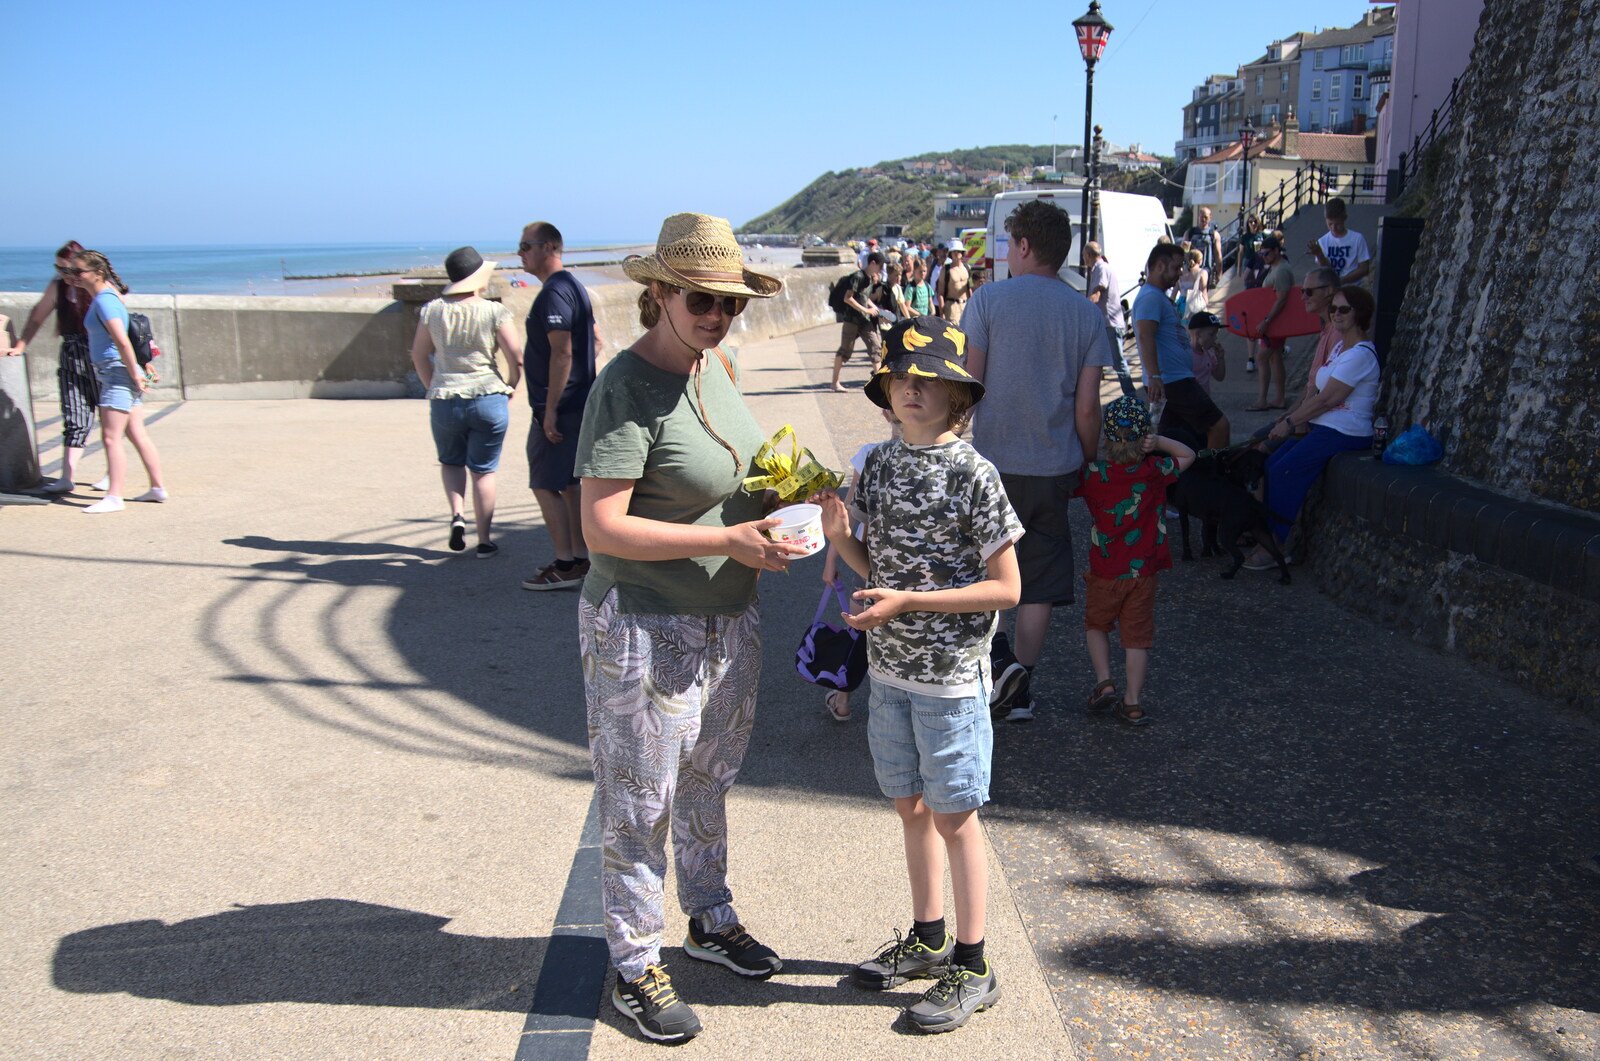 Isobel and Harry by the pier from Camping at Forest Park, Cromer, Norfolk - 12th August 2022